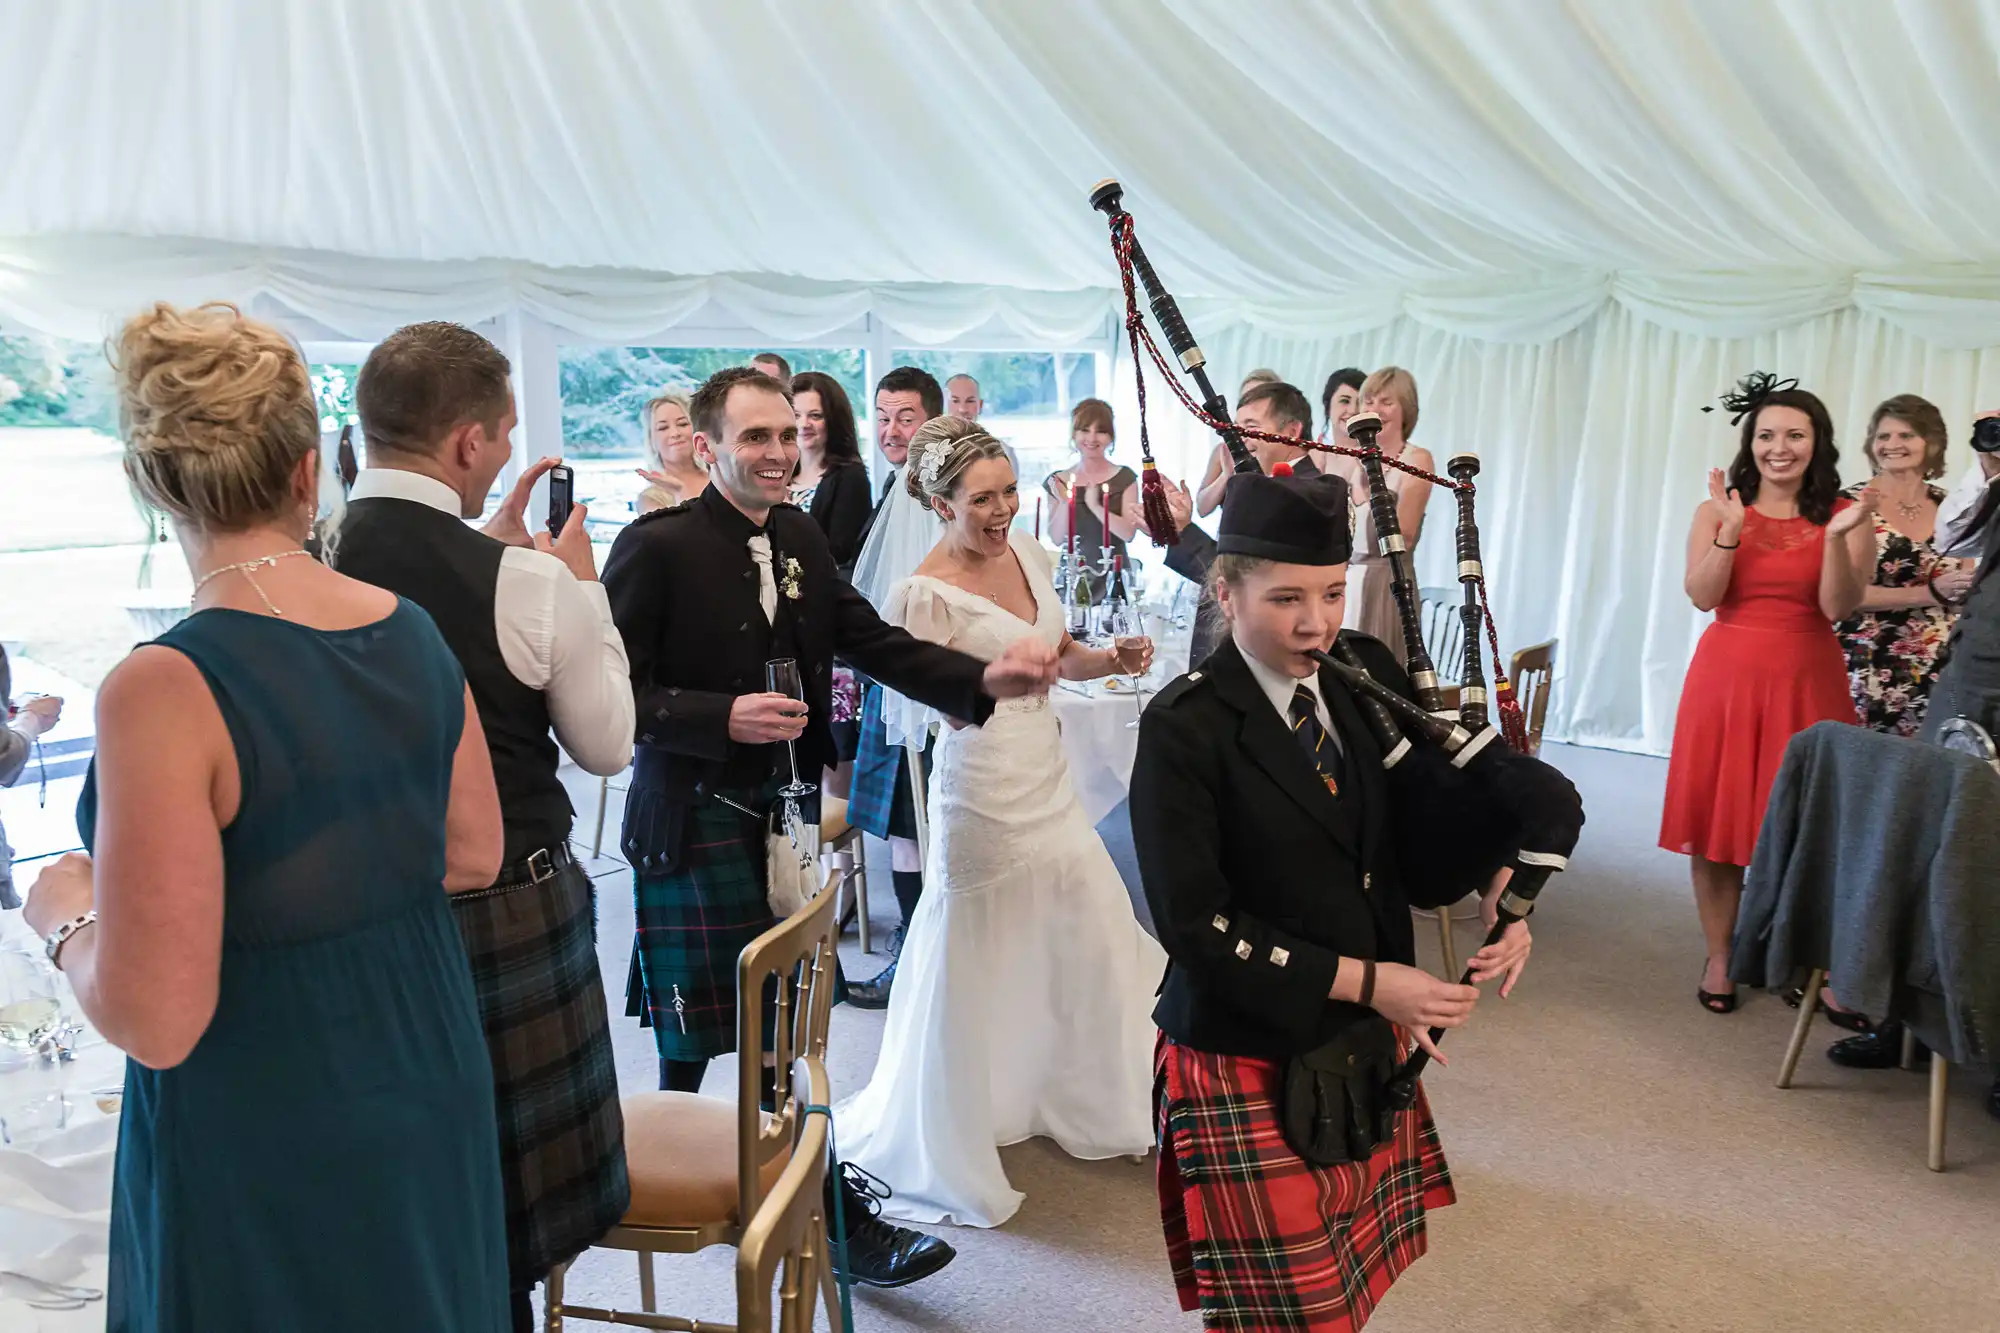 Wedding guests applauding as a bagpiper leads the newlyweds into the reception tent.